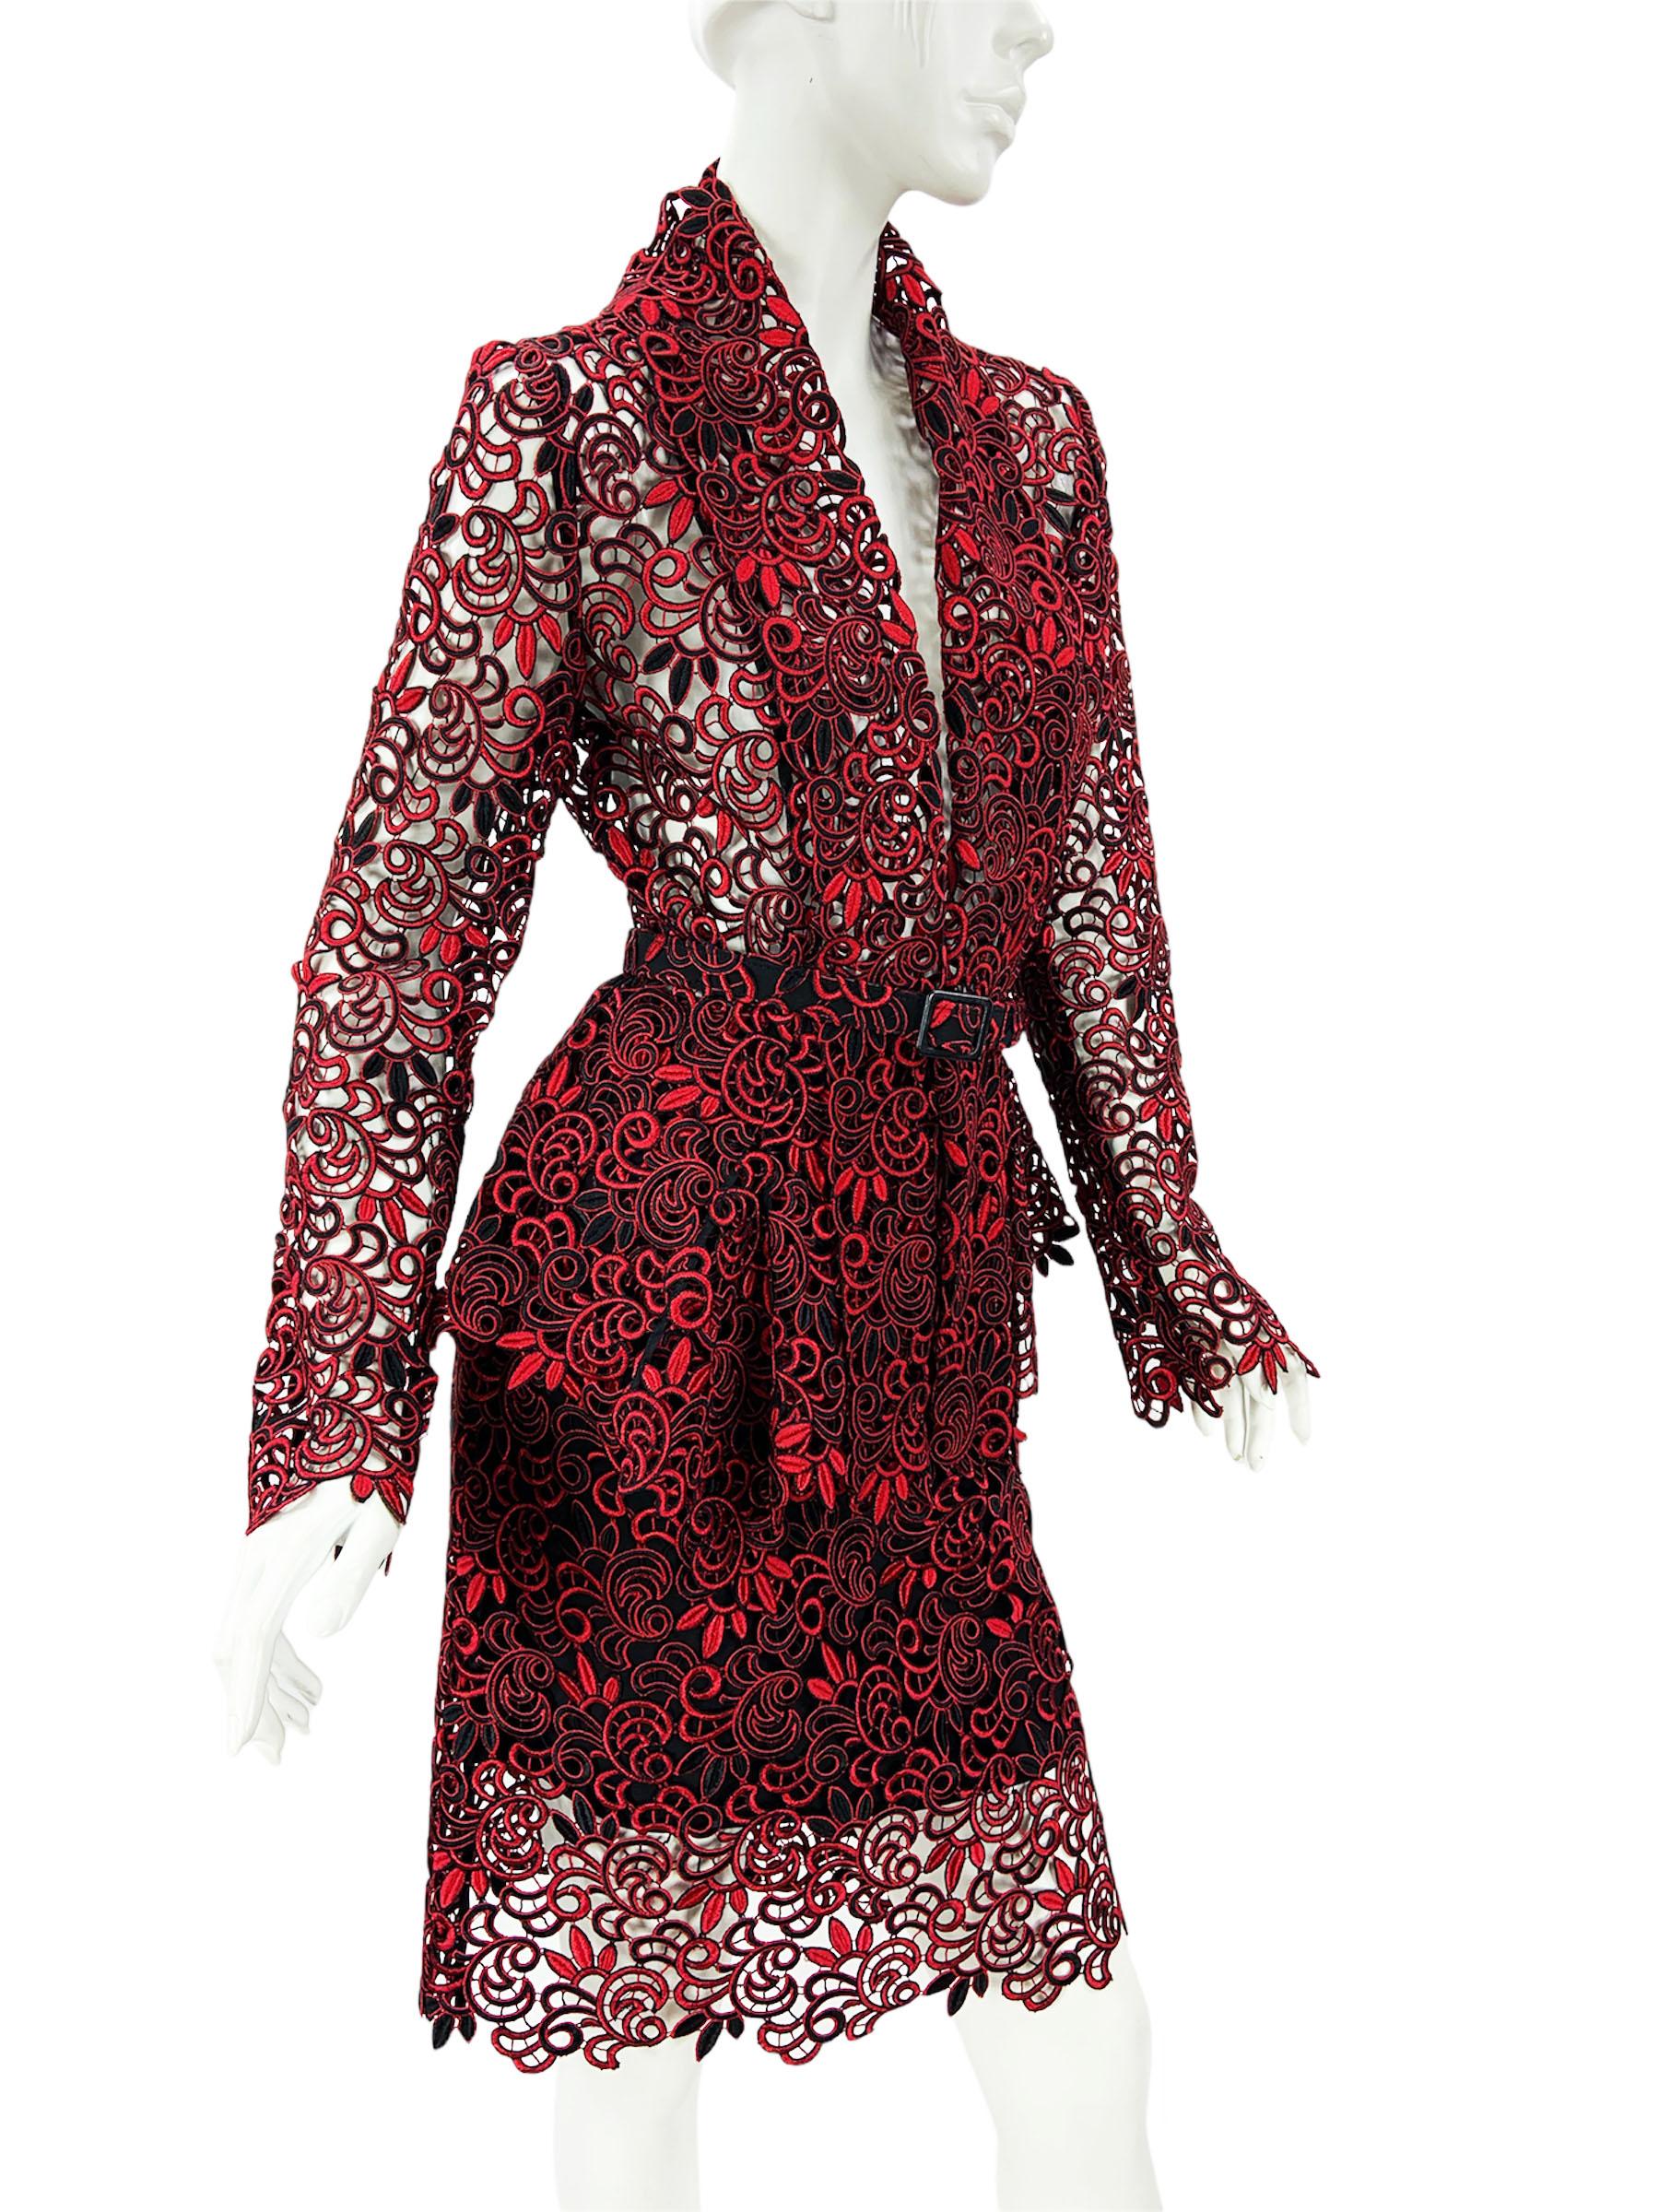 New Oscar De La Renta Lace Belted Skirt Suit 
F/W 2014 - Last Oscar De La Renta Collection Created Maestro by Himself !!!
US size - 6
Amazing French Lace in Ruby Red Color Combined Together with Classic Black Creates a Very Rich Look.
One Hook